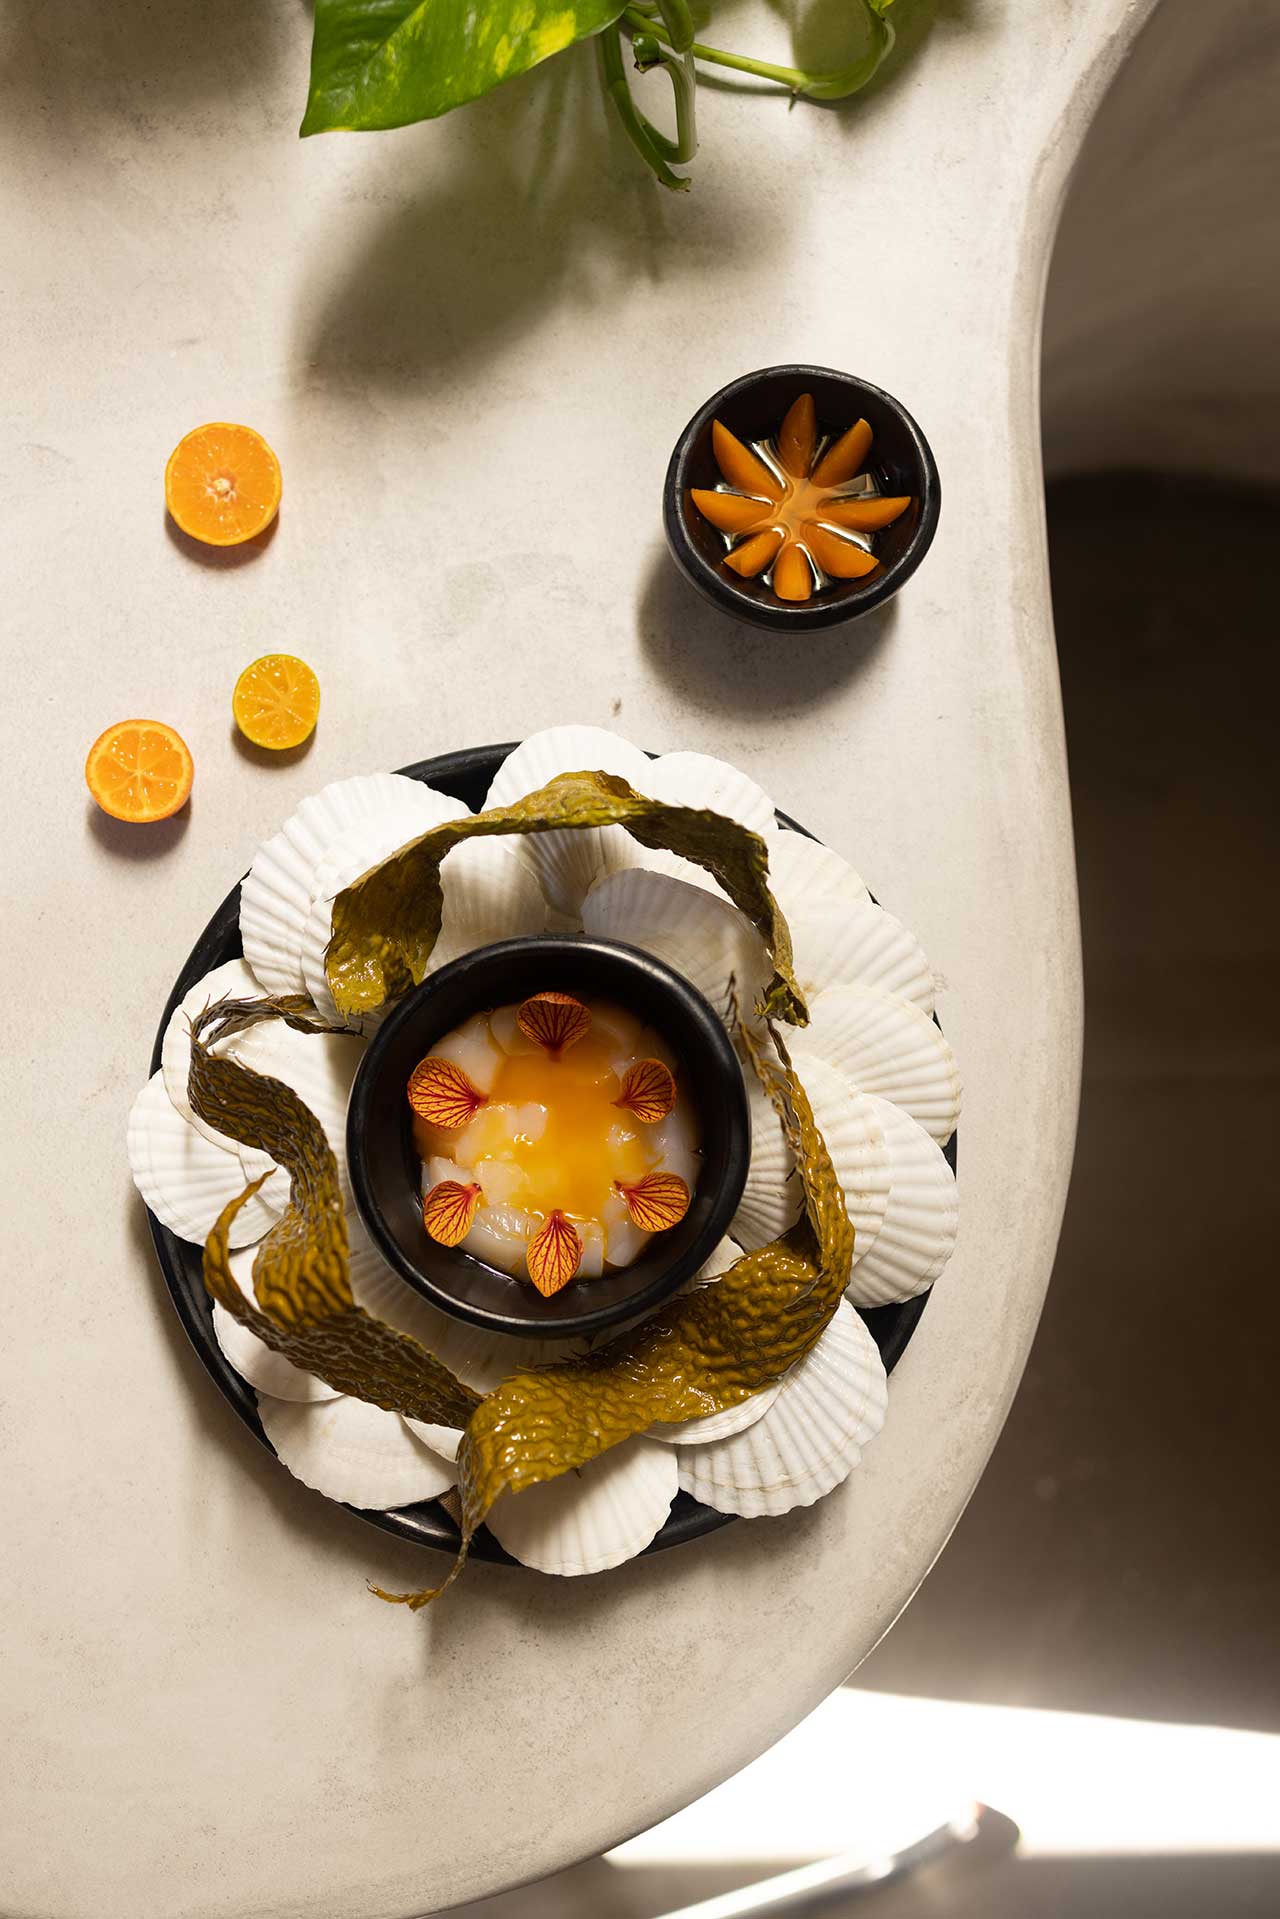 citrus fruit cut into slices and arranged in a bowl surrounded by seashells on a beige table